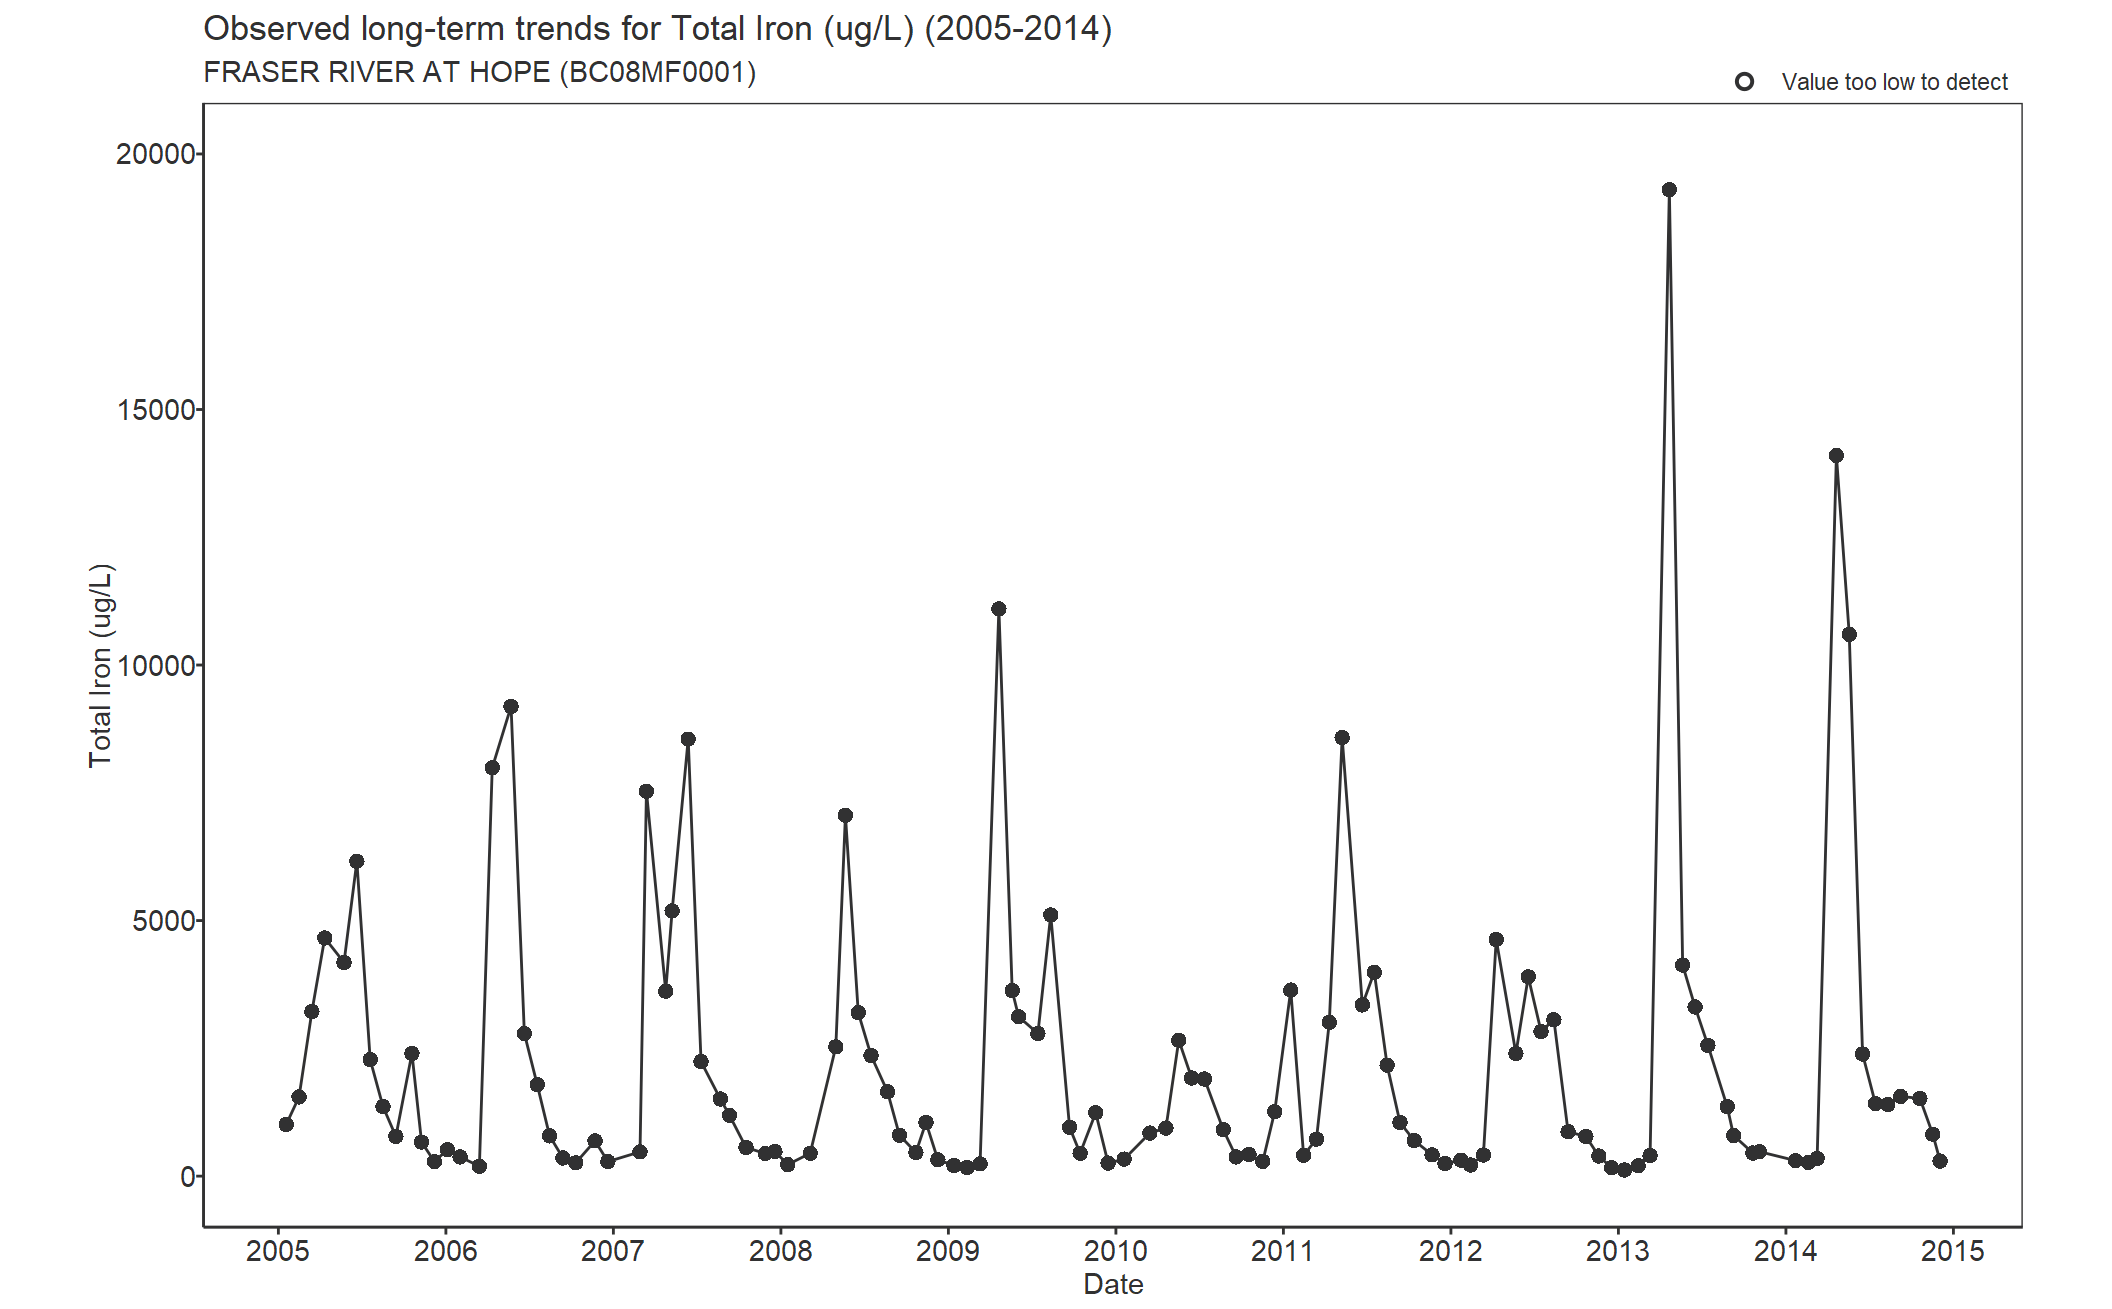 Observed long-term trends for Iron Total (2005-2014)